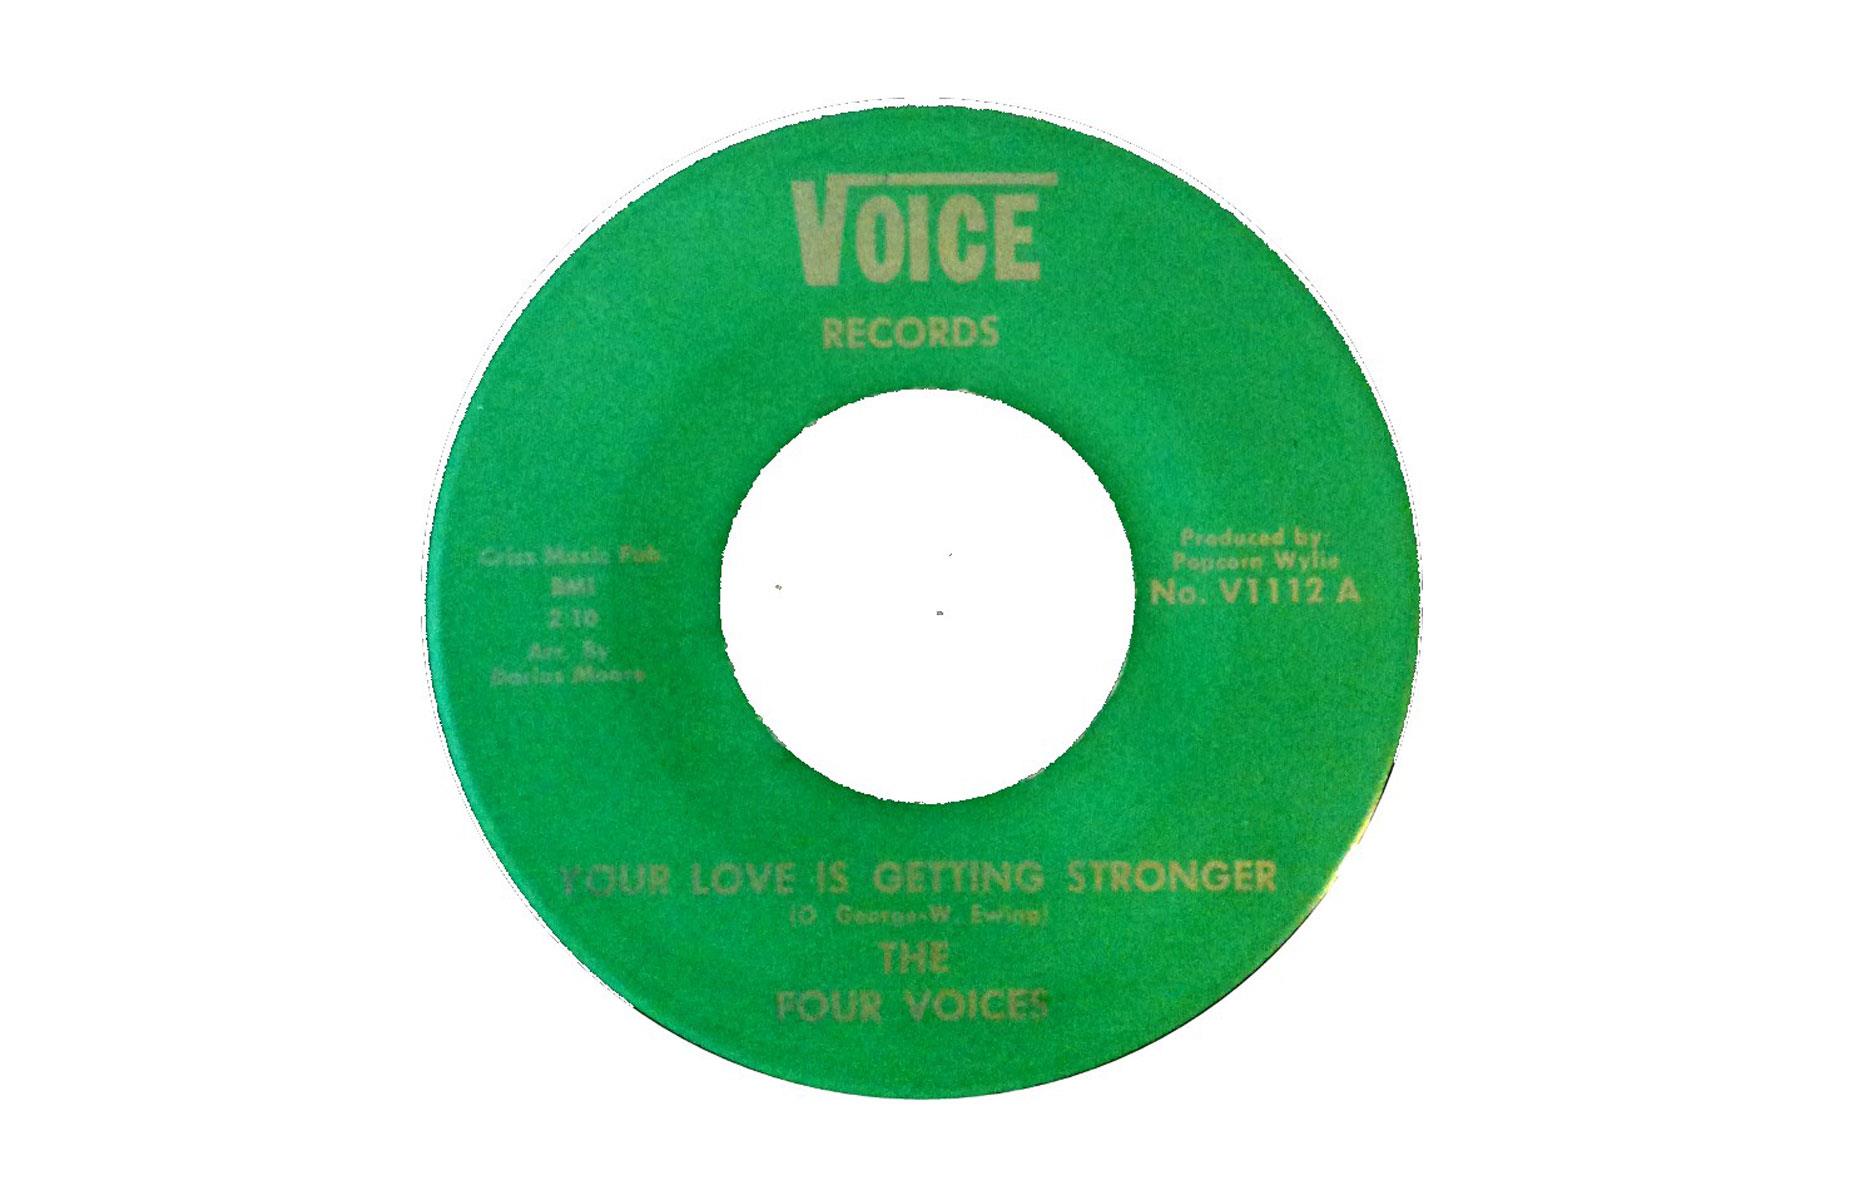 The Four Voices – Your Love is Getting Stronger: up to $4,400 (£3,738)